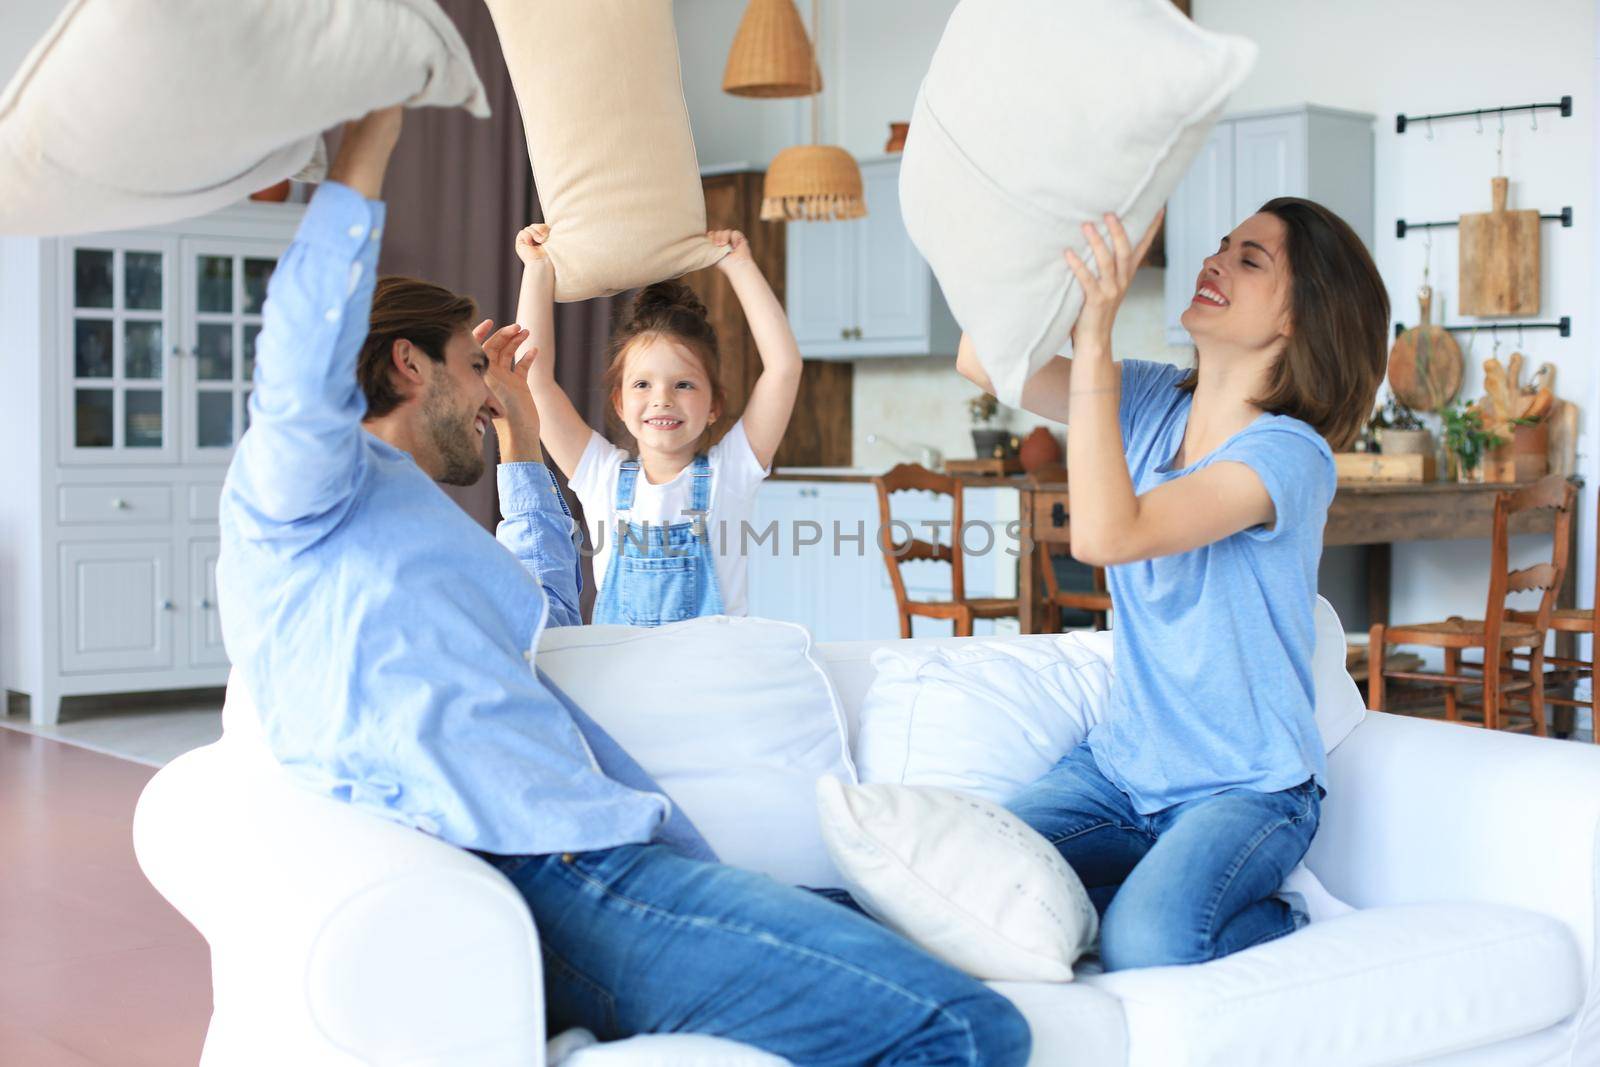 Happy young family having fun with pillows on sofa. by tsyhun